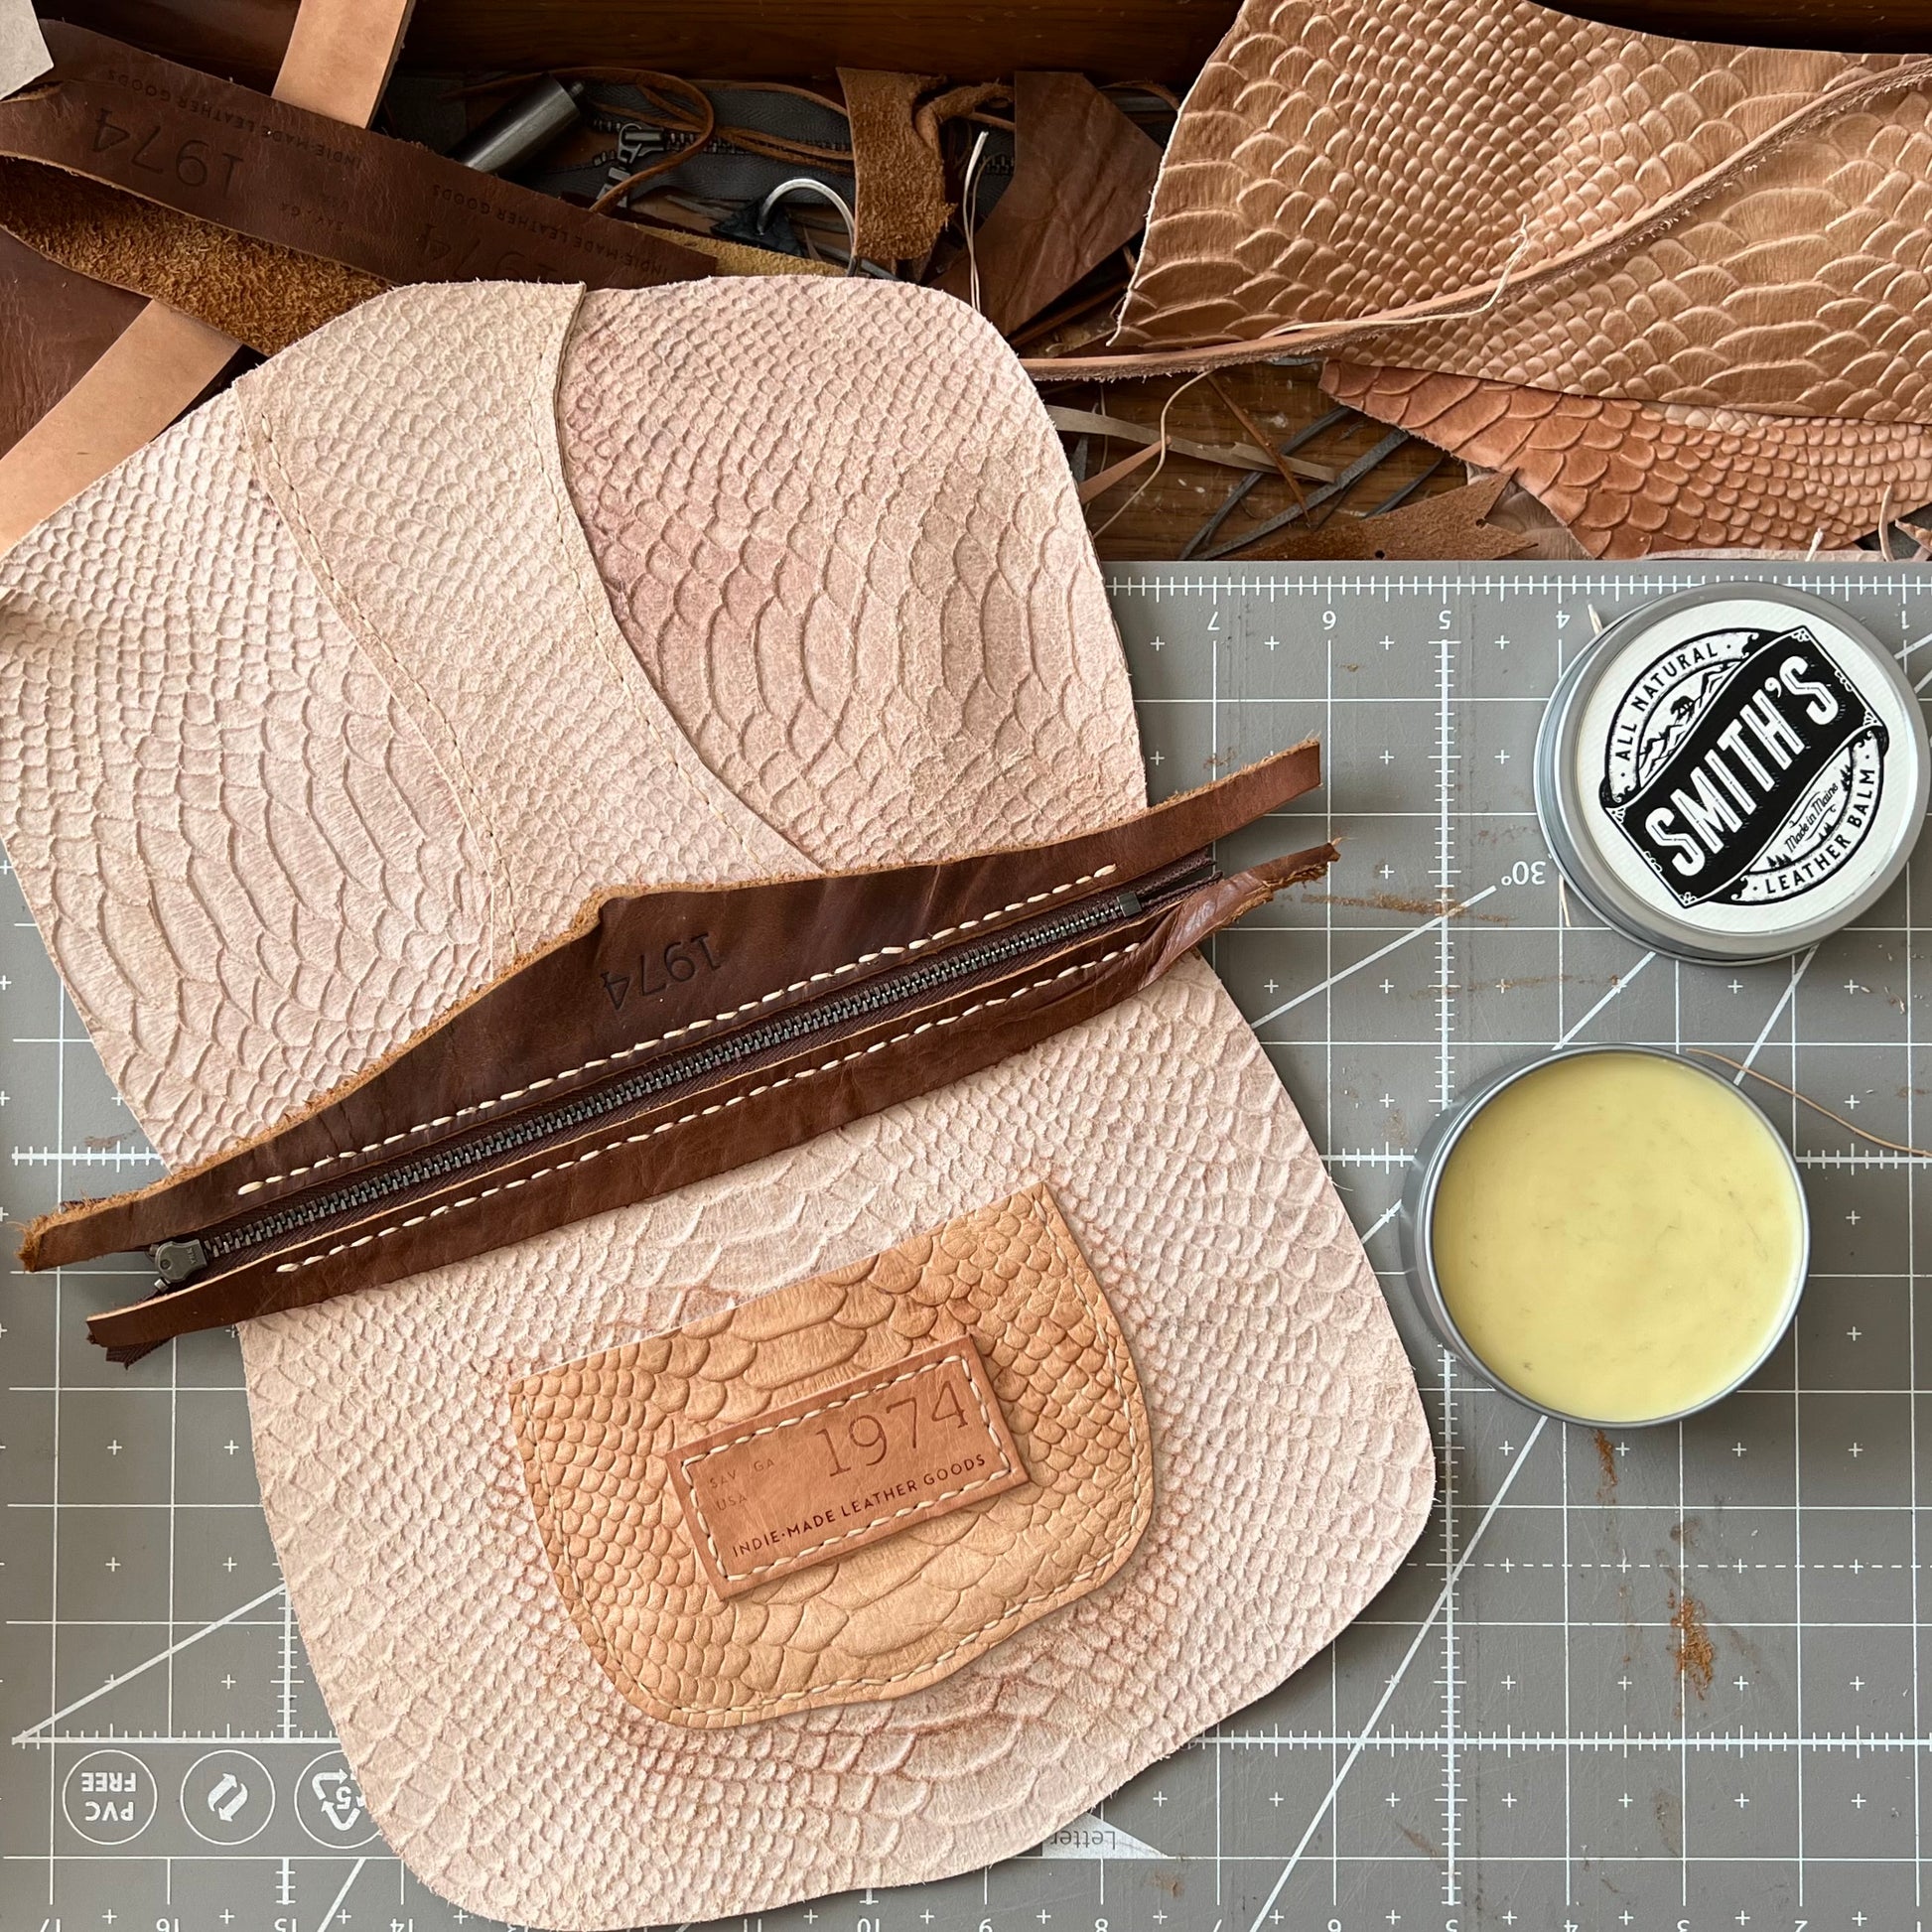 1974 Broad River Leather Wristlet Being Made